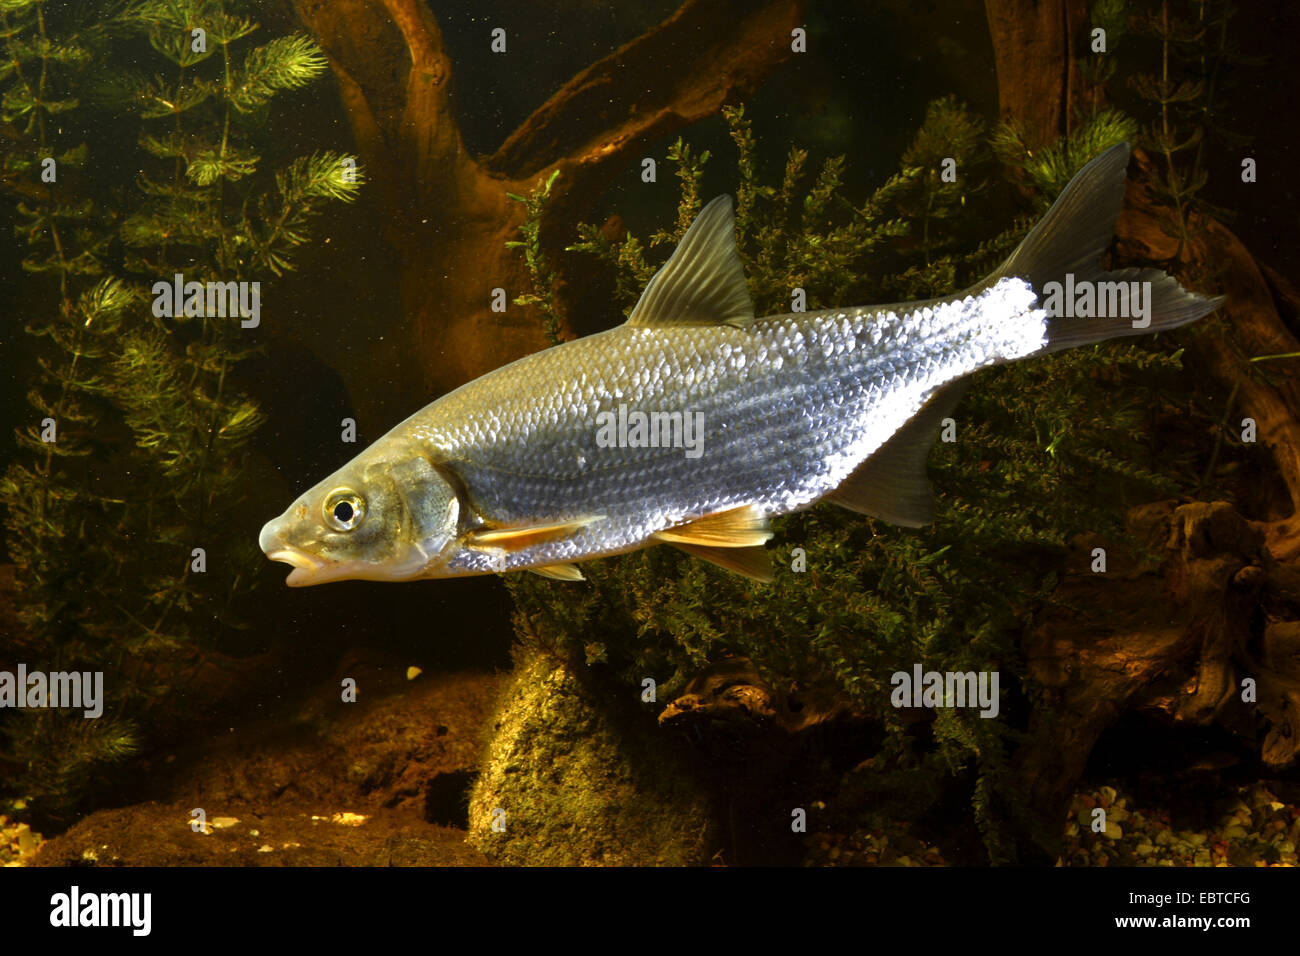 East European bream, zaehrte, Baltic vimba, Vimba bream, Vimba, Zanthe, Zarte (Vimba vimba, Abramis vimba), swimming at the bottom of a river covered with stones and waterplants Stock Photo